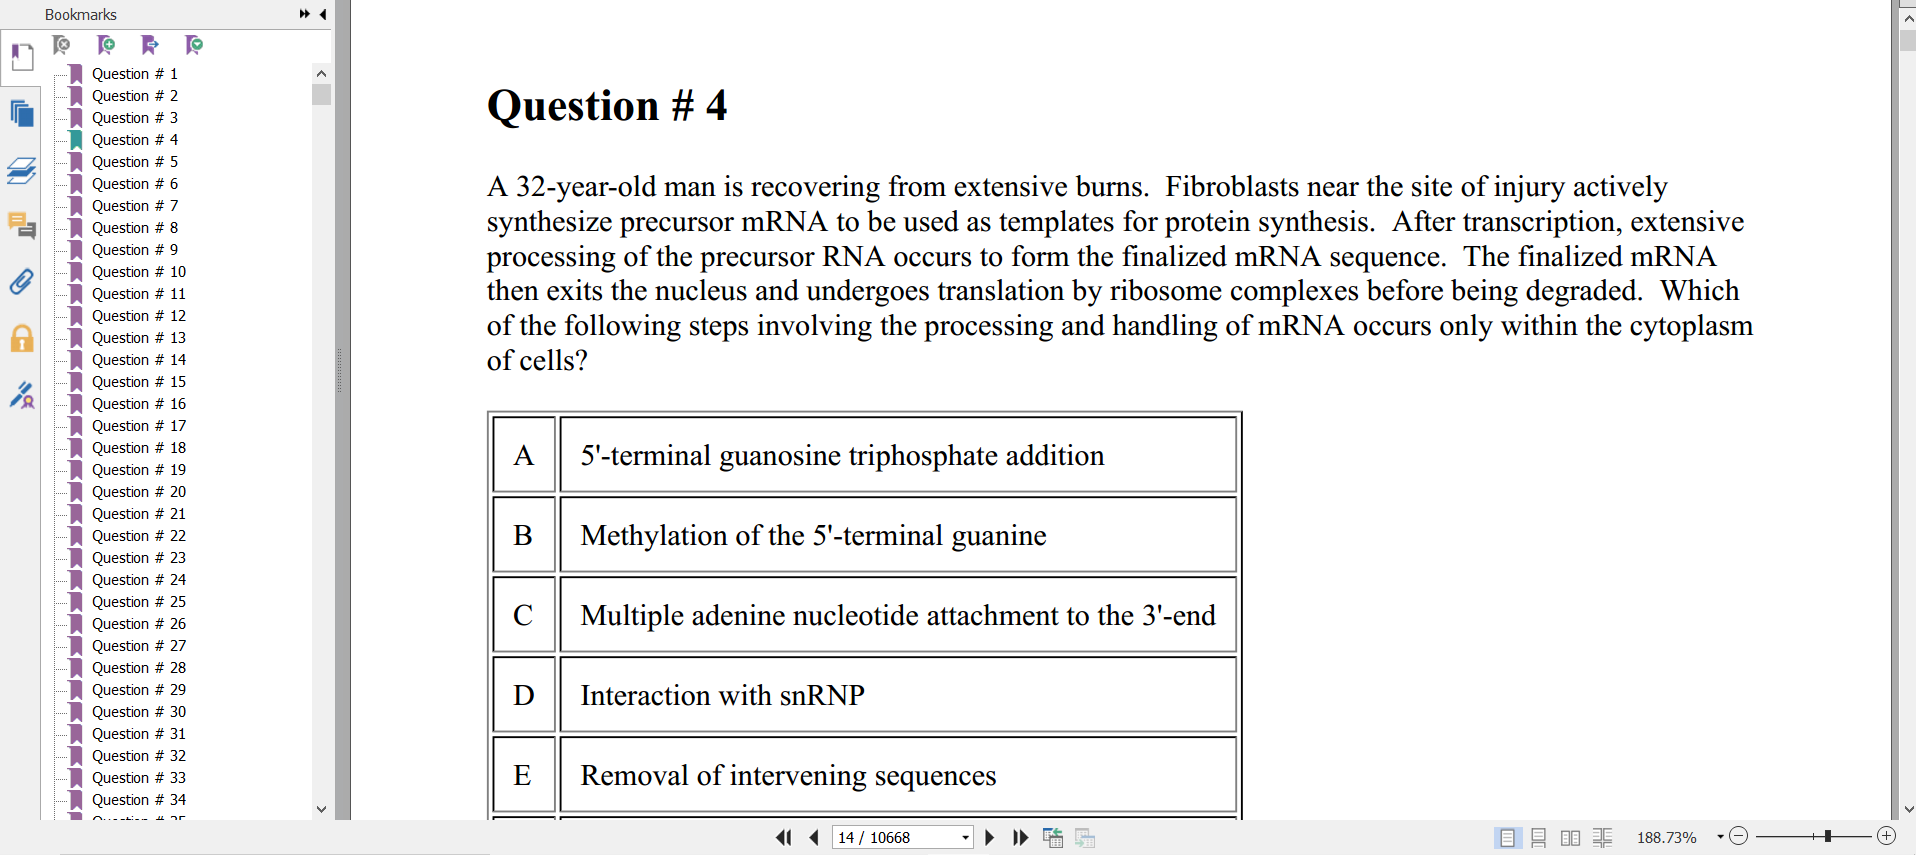 usmle step 2 example questions